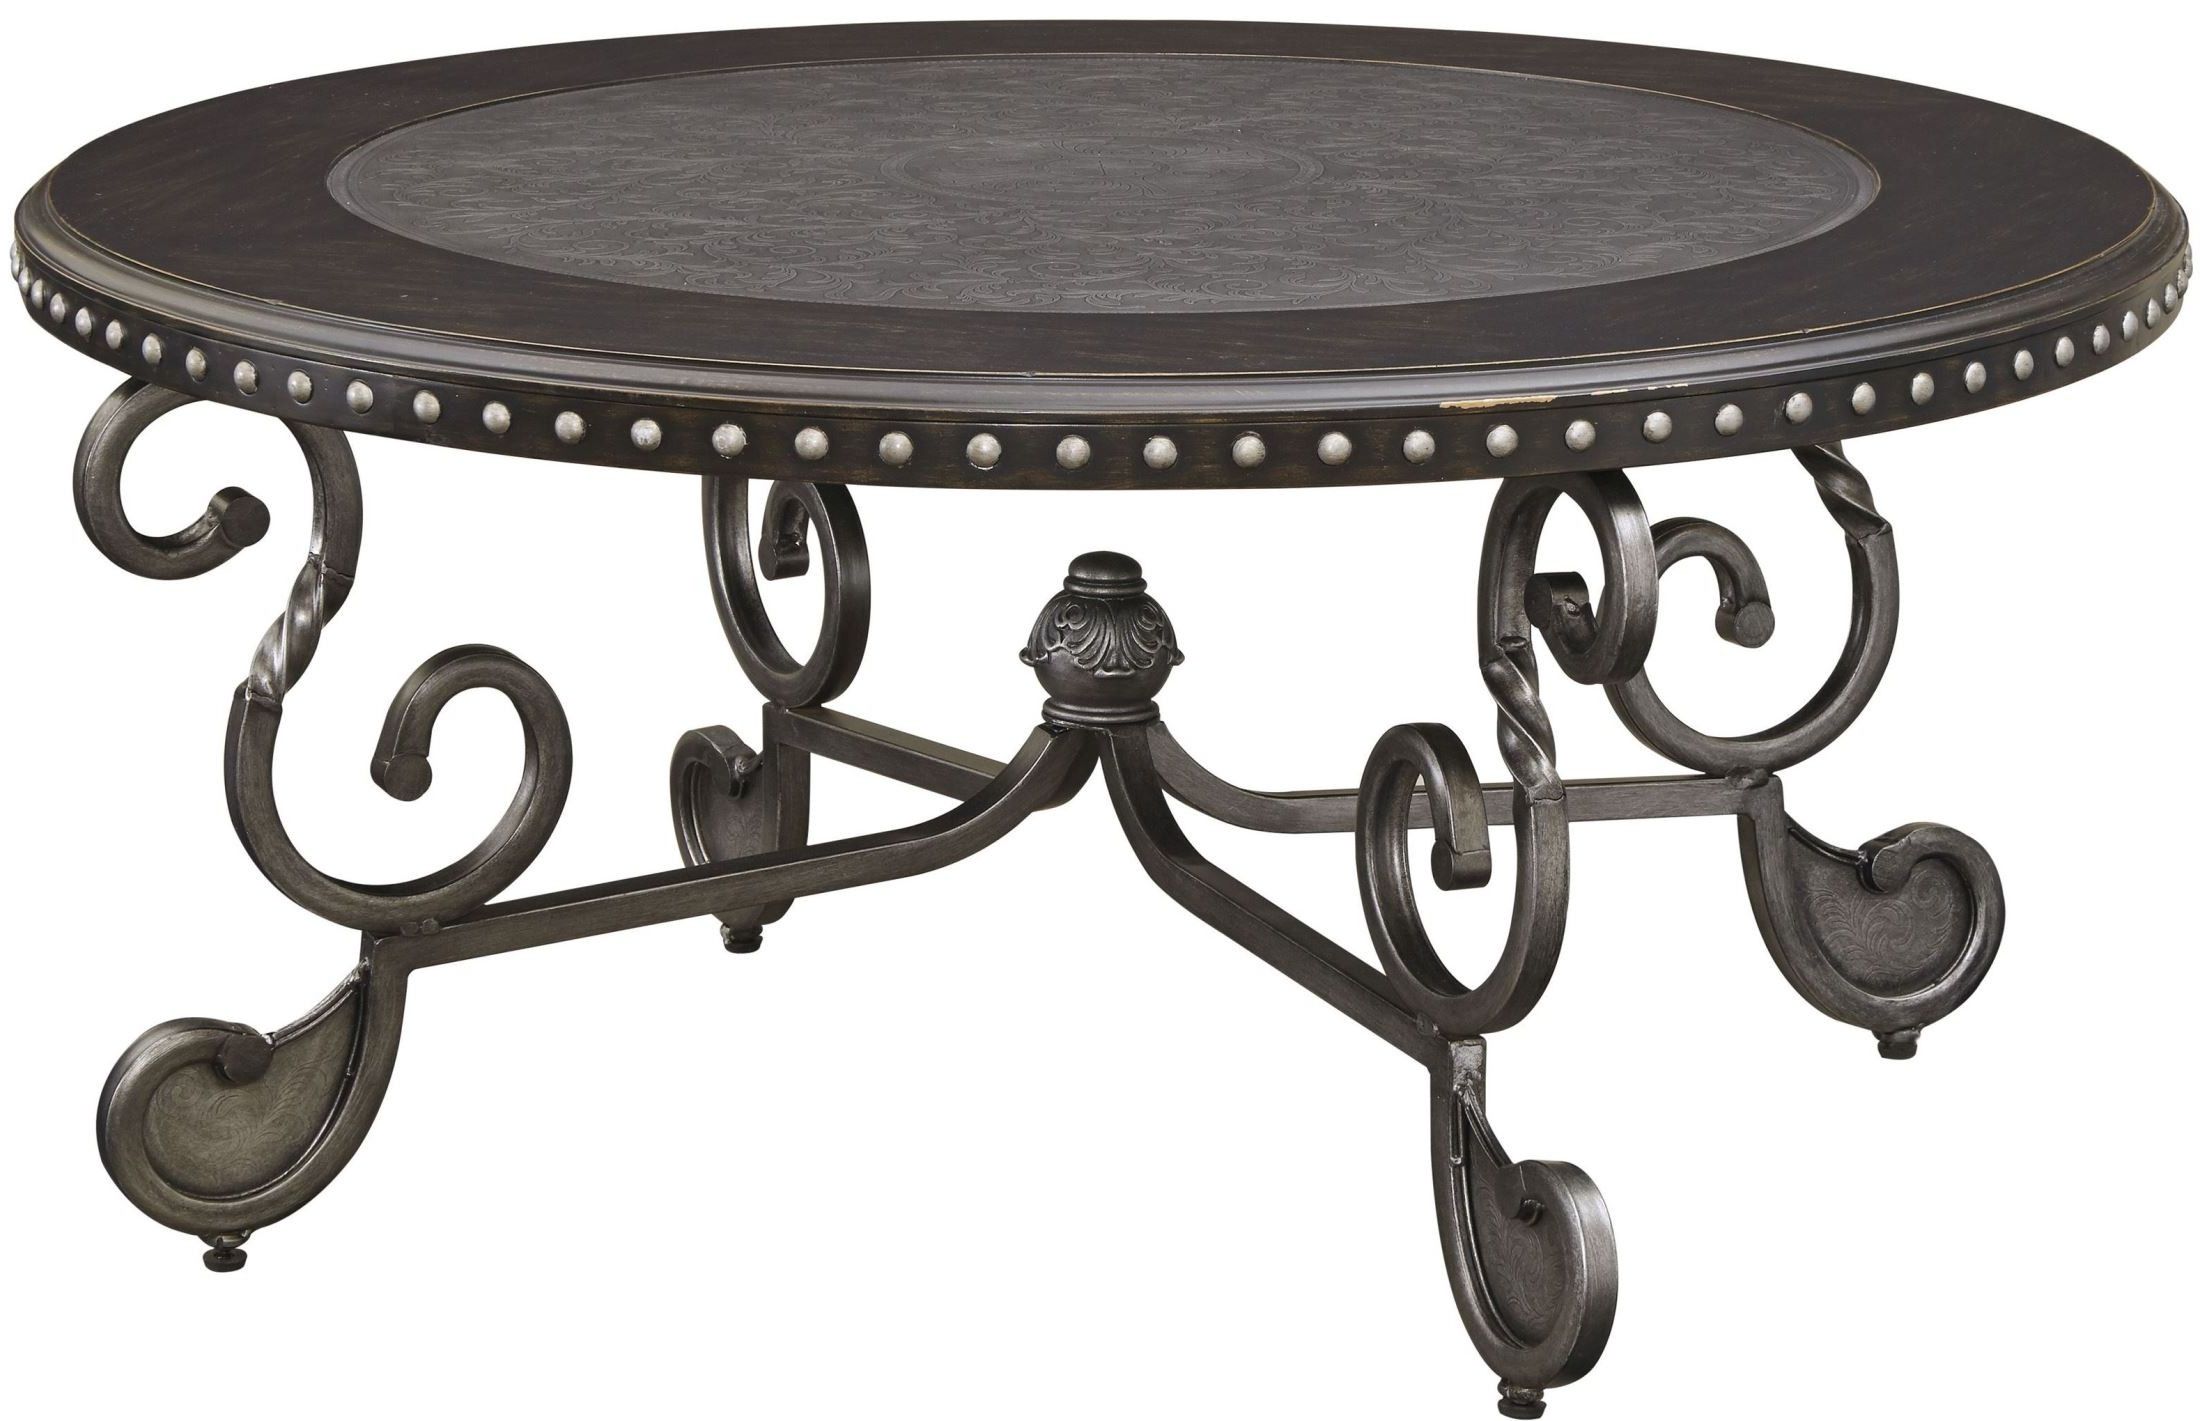 Jonidell Black Round Cocktail Table From Ashley (t582 8 Pertaining To Newest Dark Coffee Bean Cocktail Tables (View 11 of 20)